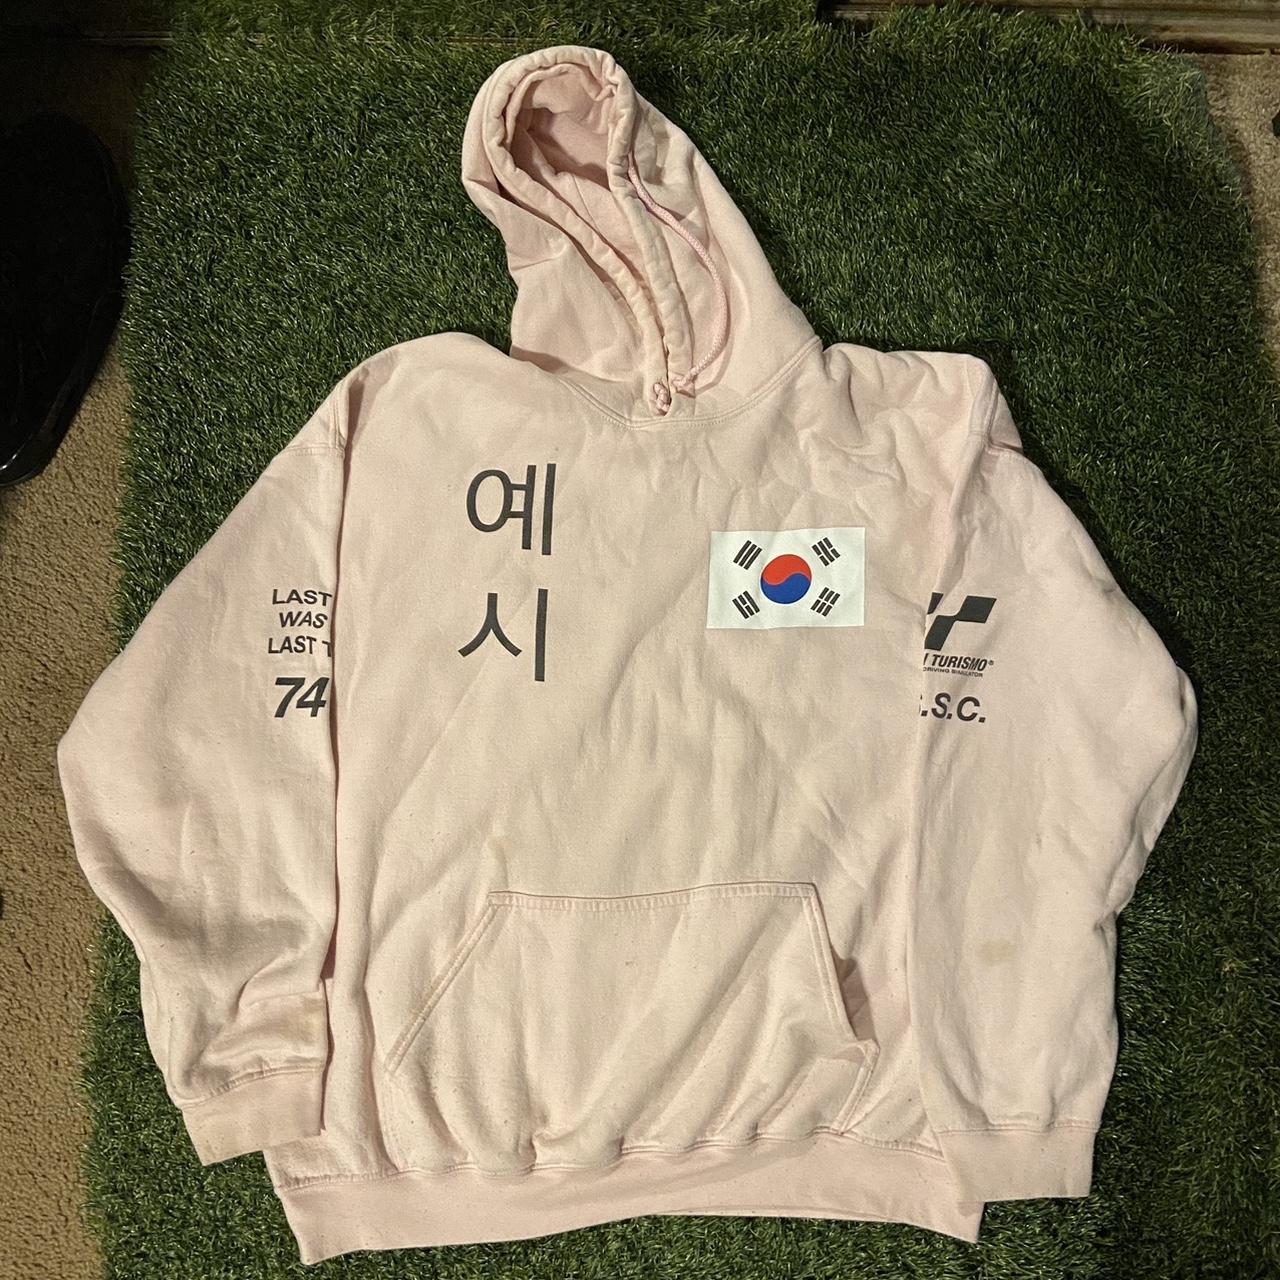 item listed by brandonsfinds